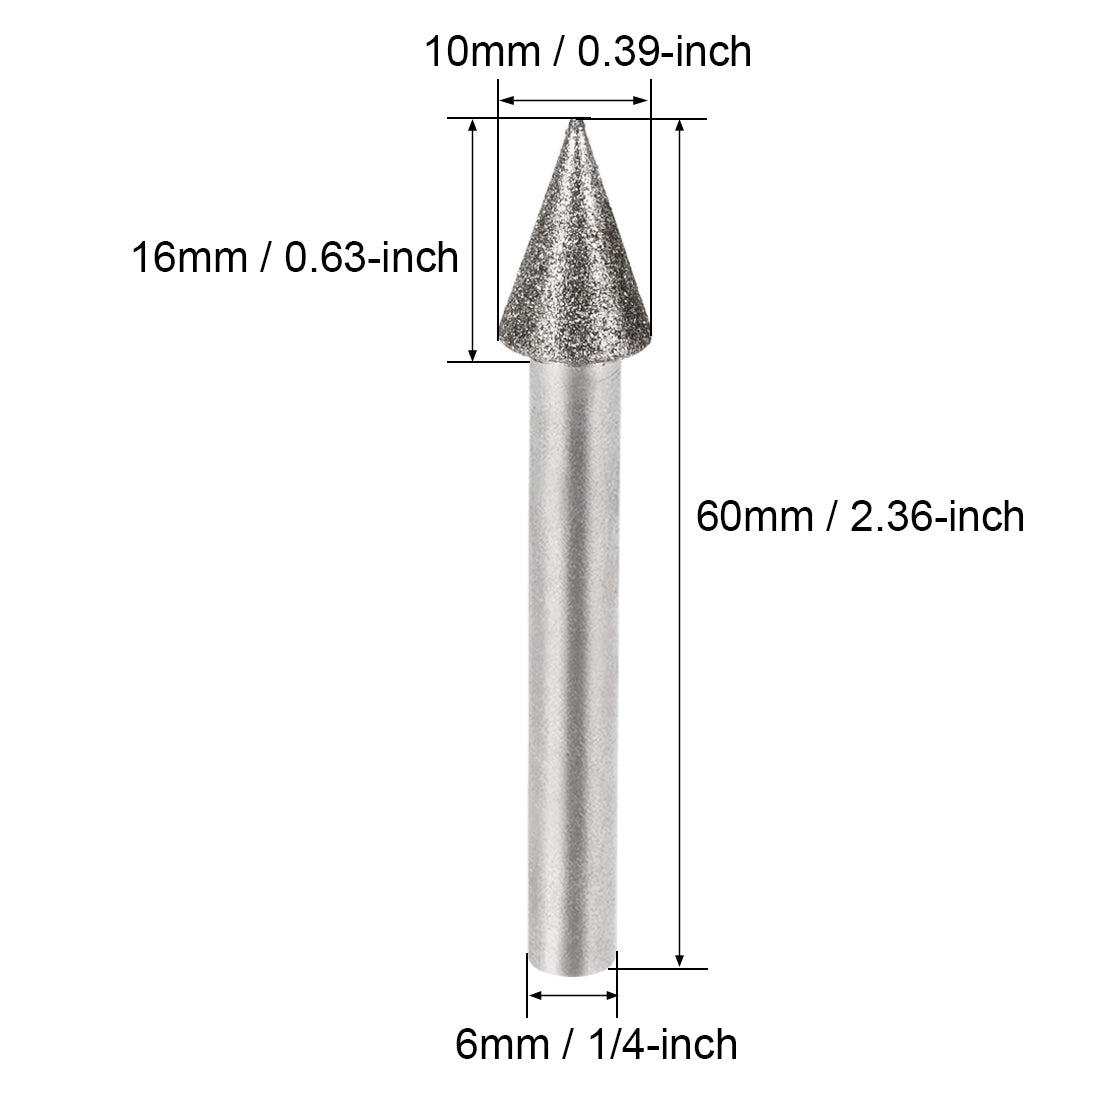 uxcell Uxcell Diamond Burrs Grinding Drill Bits for Carving Rotary Tool 1/4-Inch Shank 10mm Conial 120 Grit 10 Pcs